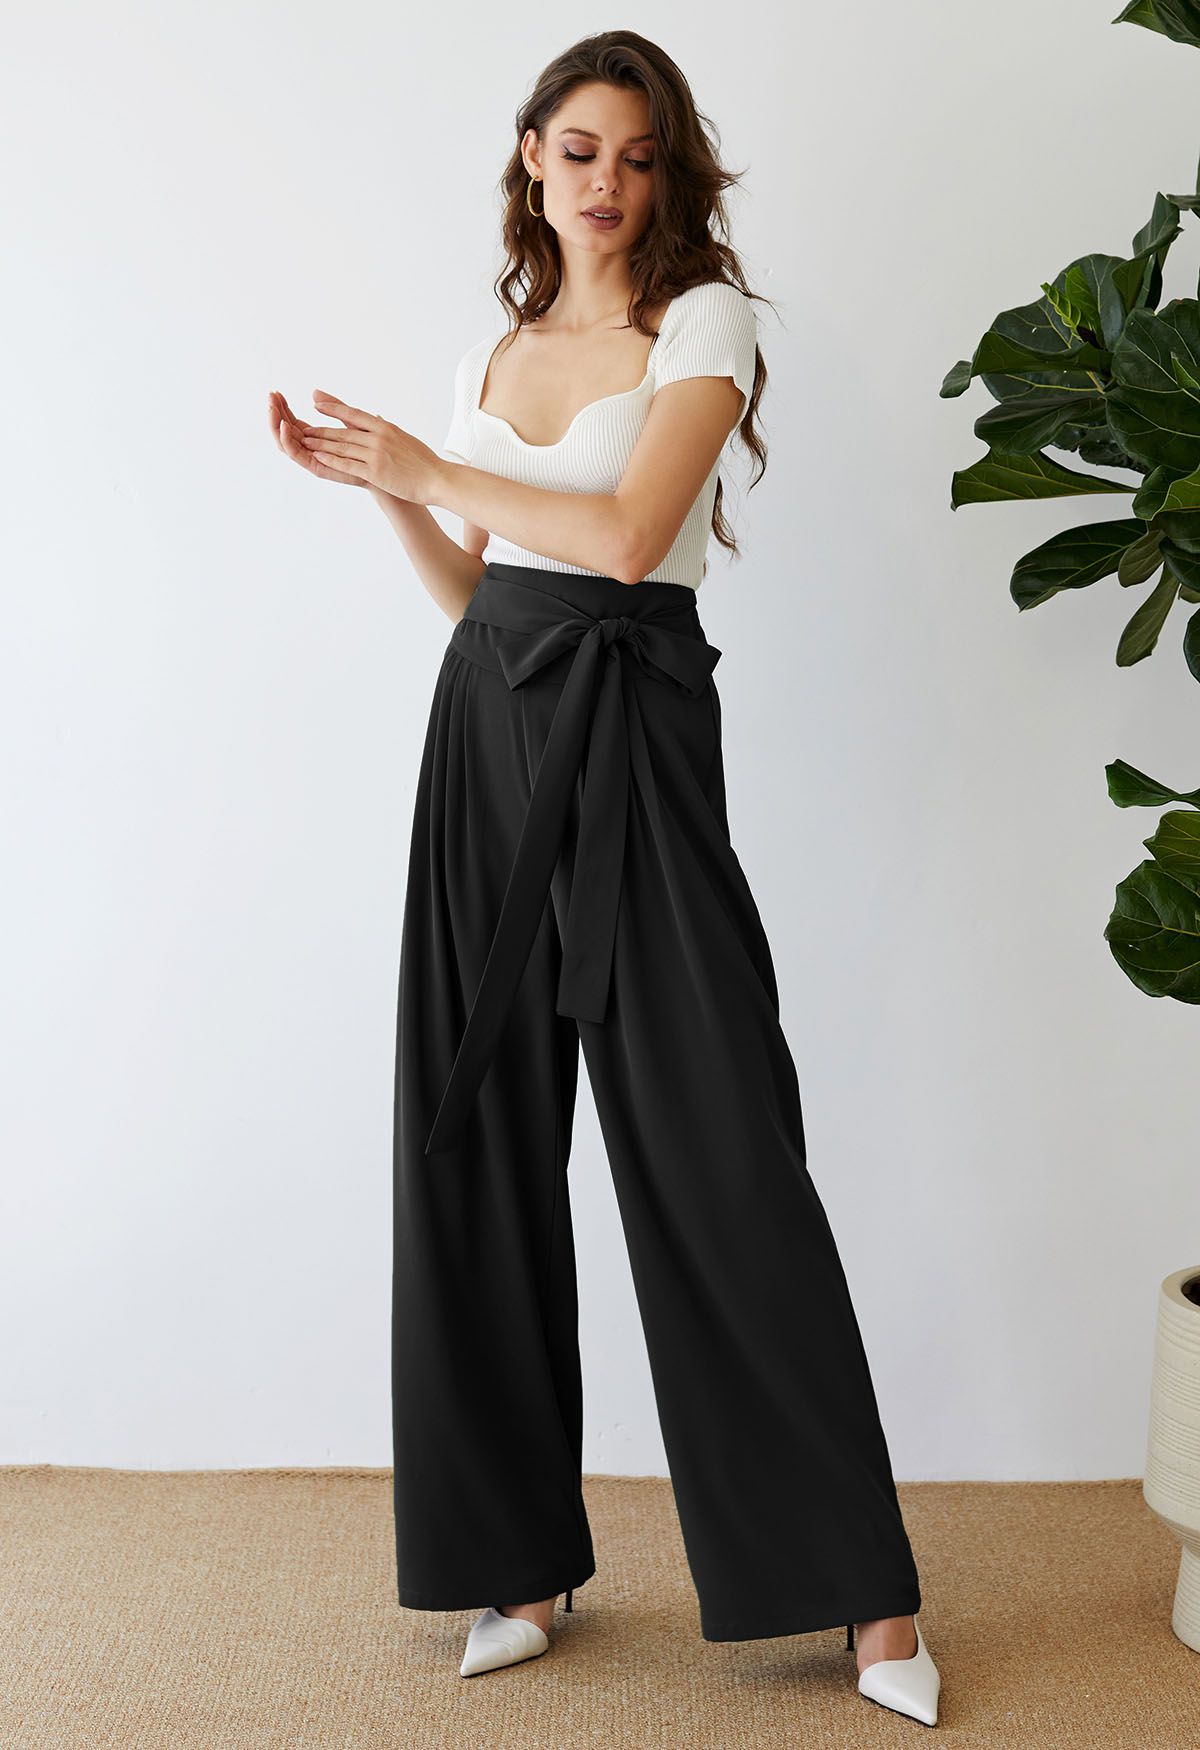 Bowknot High Waist Wide-Leg Pants in Black - Retro, Indie and Unique ...